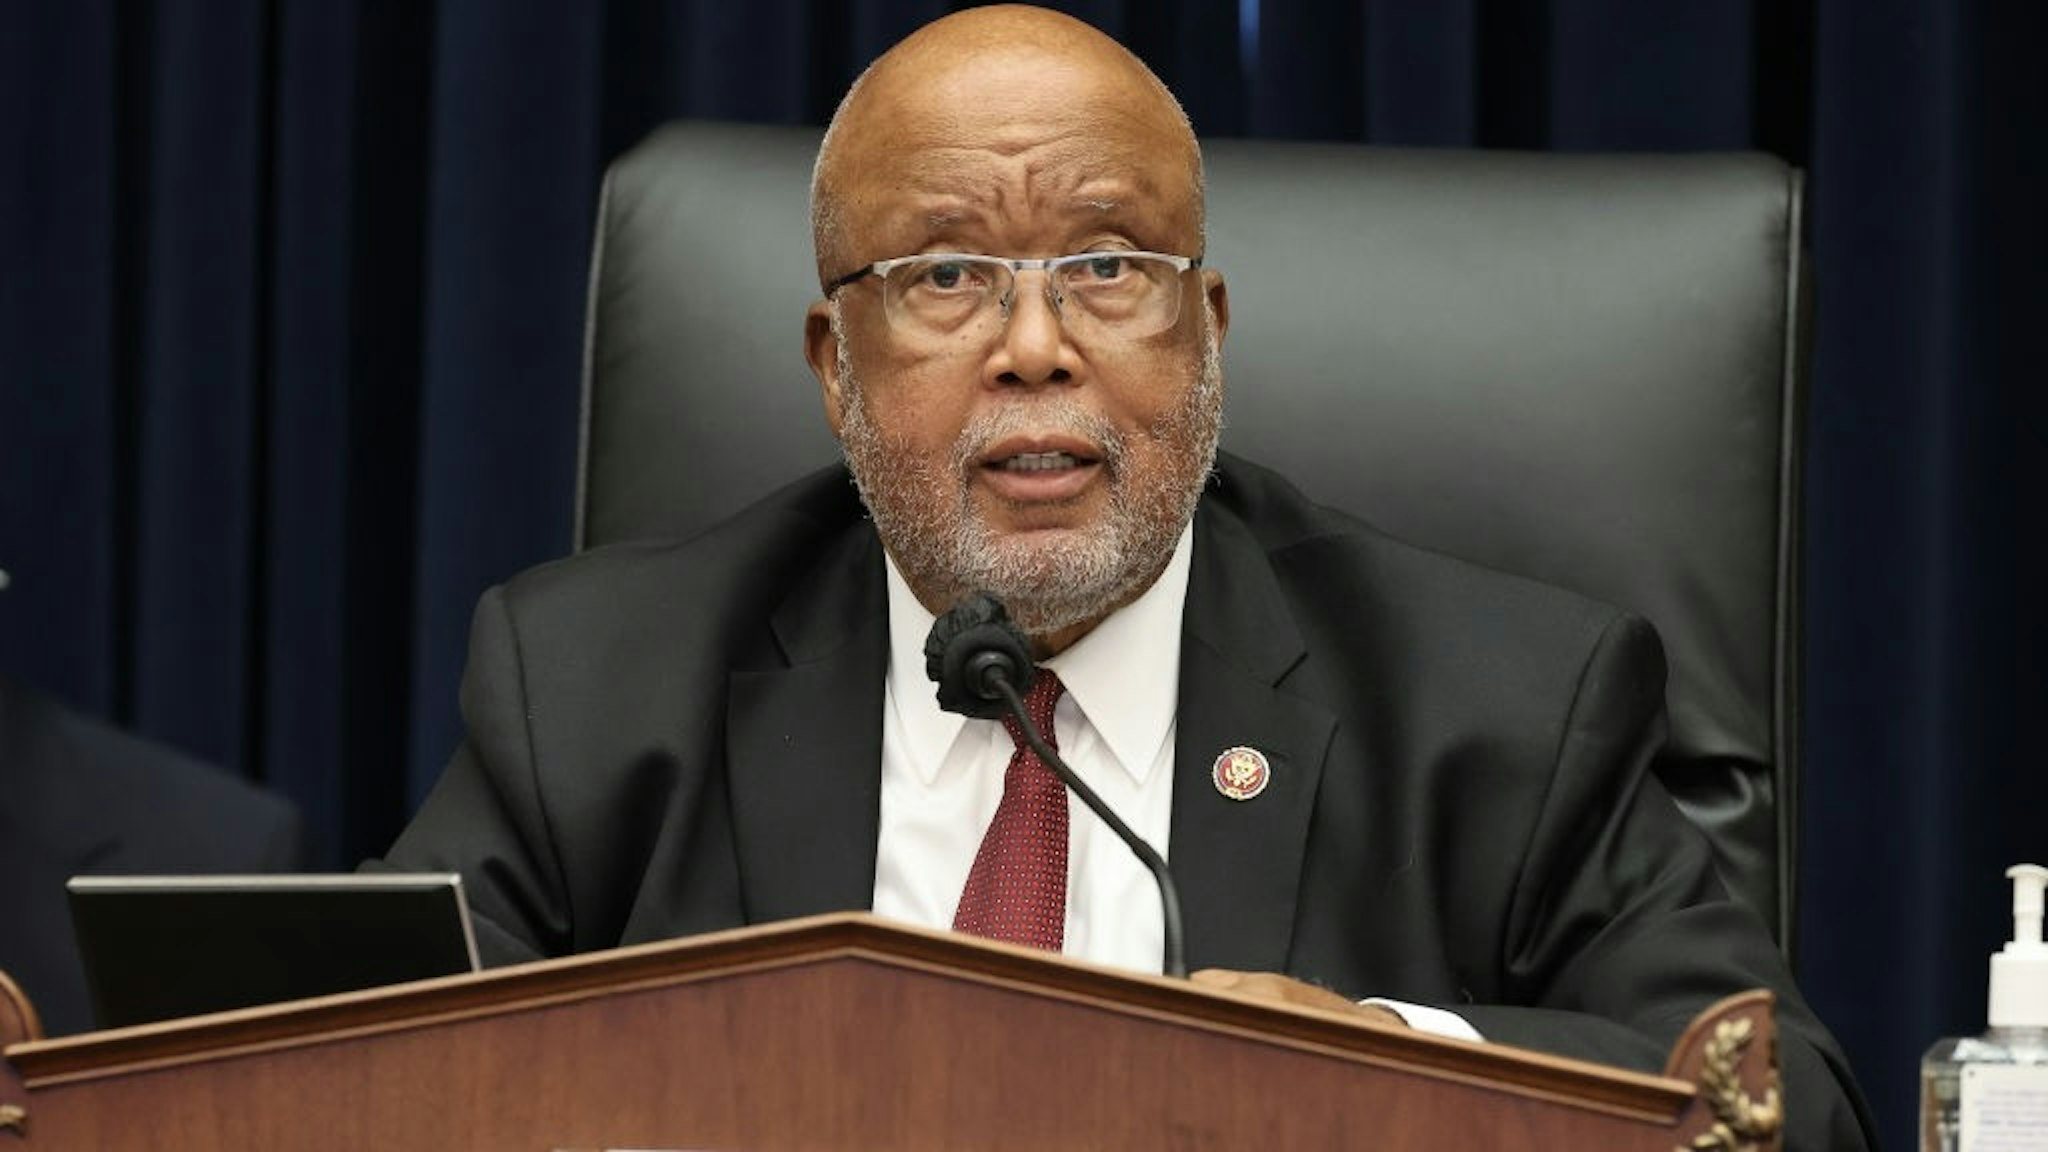 WASHINGTON, DC - SEPTEMBER 17: House Homeland Security Committee Chairman Bennie Thompson (D-MS) announces that he will issue a subpoena to compel acting Homeland Security Secretary Chad Wolf to testify during a hearing about 'worldwide threats to the homeland' in the Rayburn House Office Building on Capitol Hill September 17, 2020 in Washington, DC. An August Government Accountability Office report found that Wolf's appointment by the Trump Administration, which has regularly skirted the Senate confirmation process, was invalid and a violation of the Federal Vacancies Reform Act. (Photo by Chip Somodevilla/Getty Images)